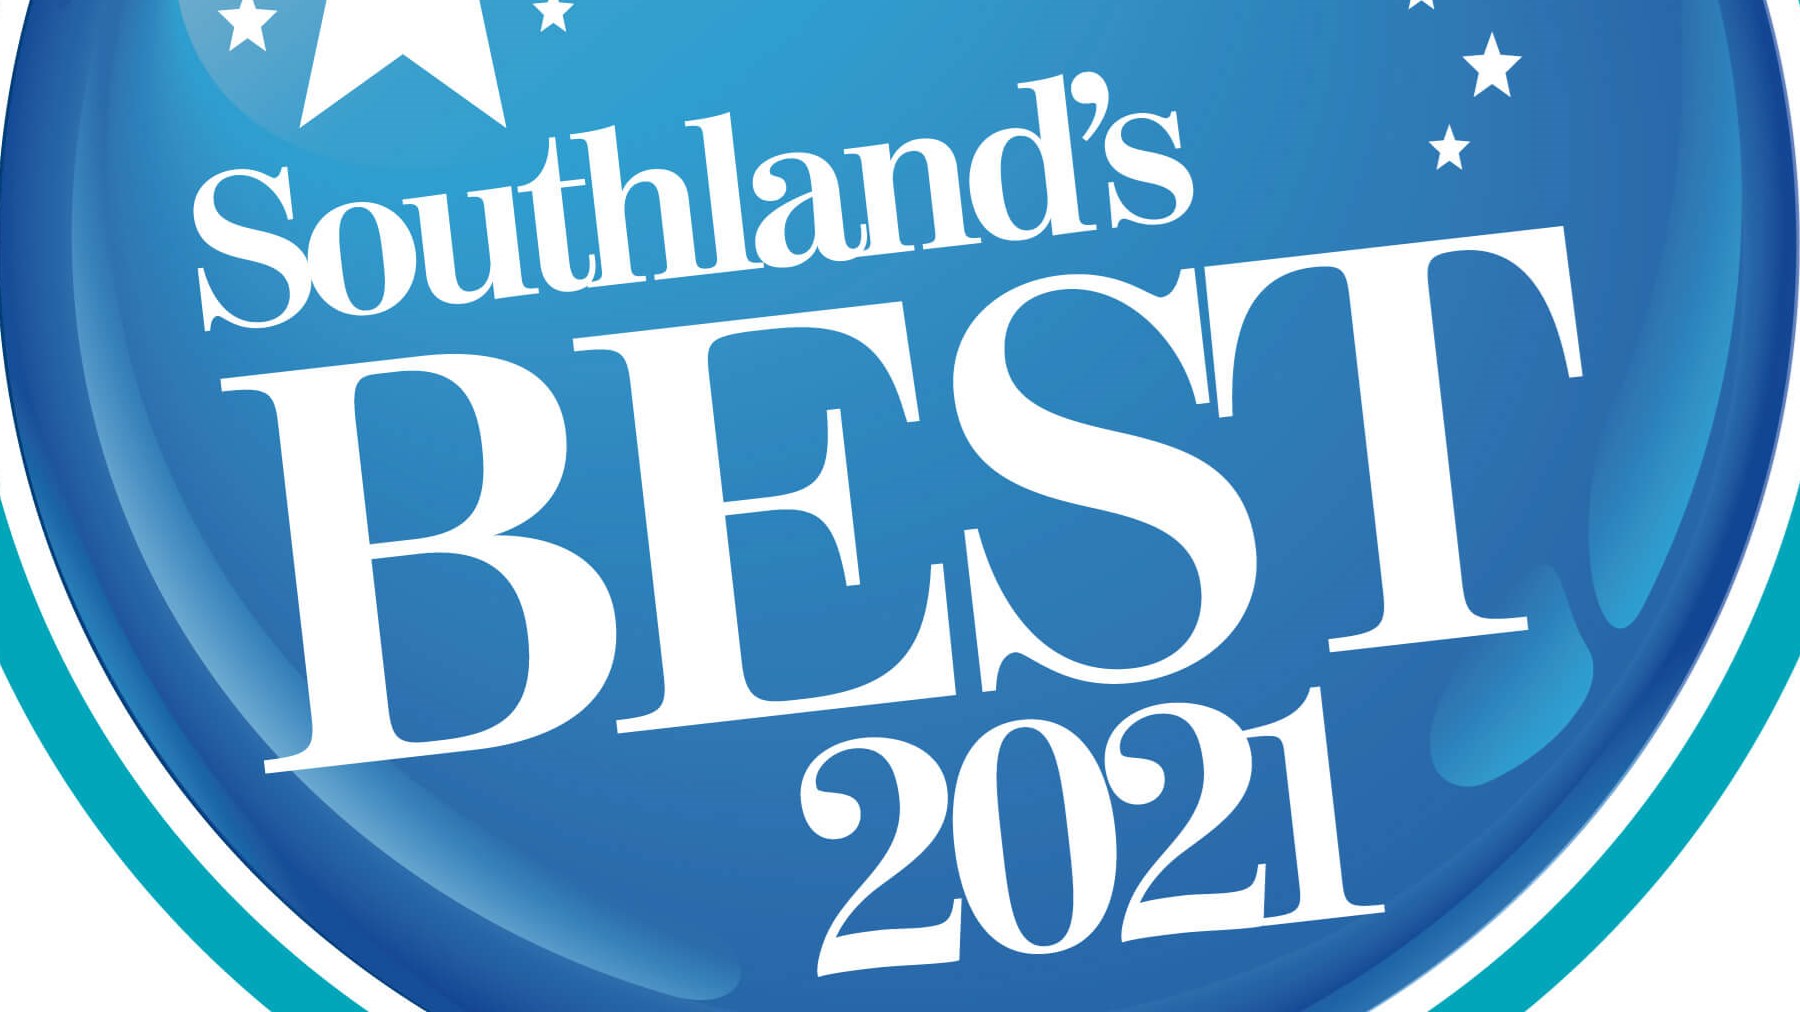 We're proud to be among one of Southland's Best Winners!